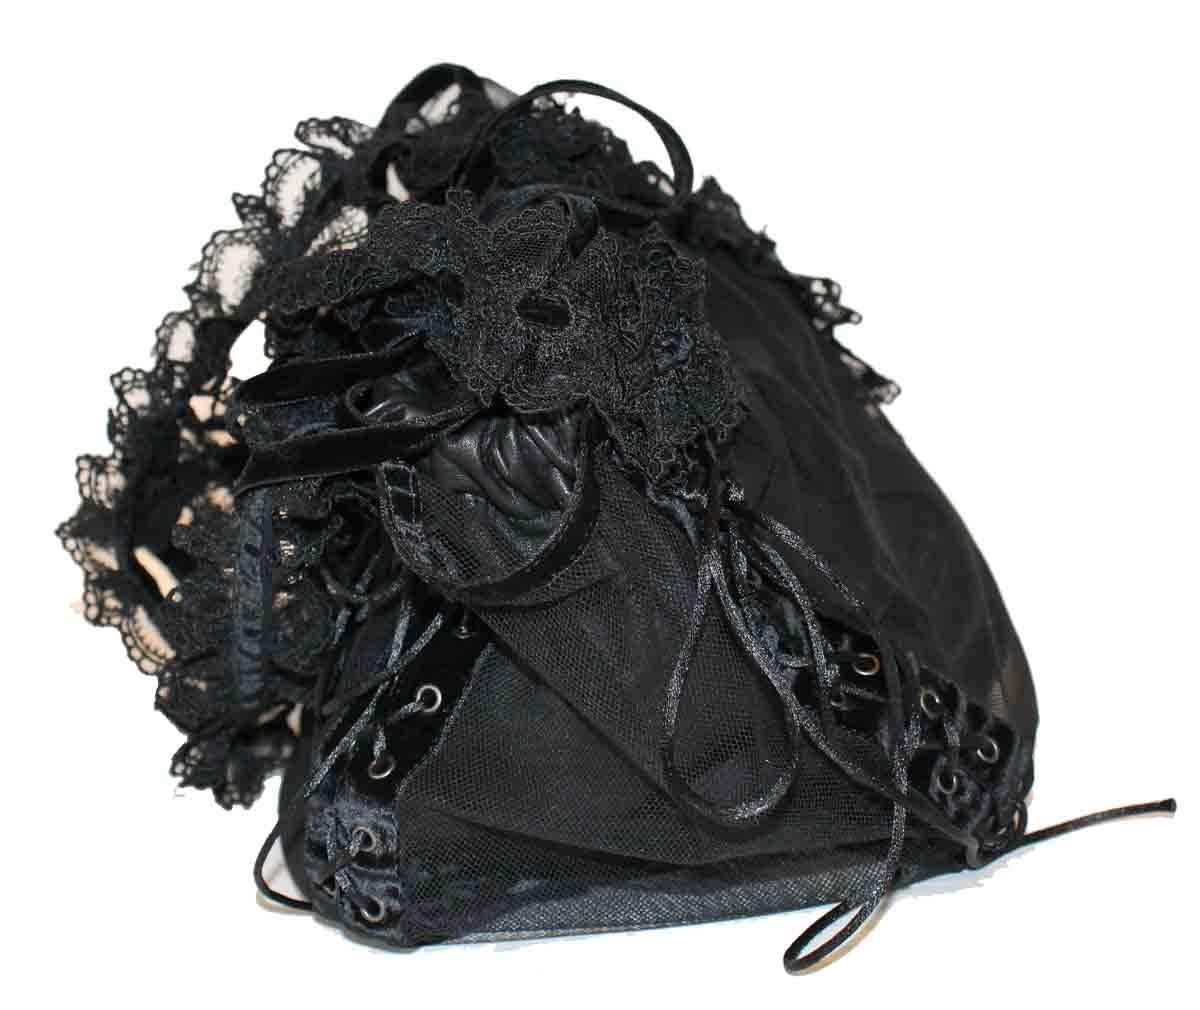 Black nappa lambskin Dual handles featuring lace. Velvet and corset accents. Tonal lining. Drawstring closure.